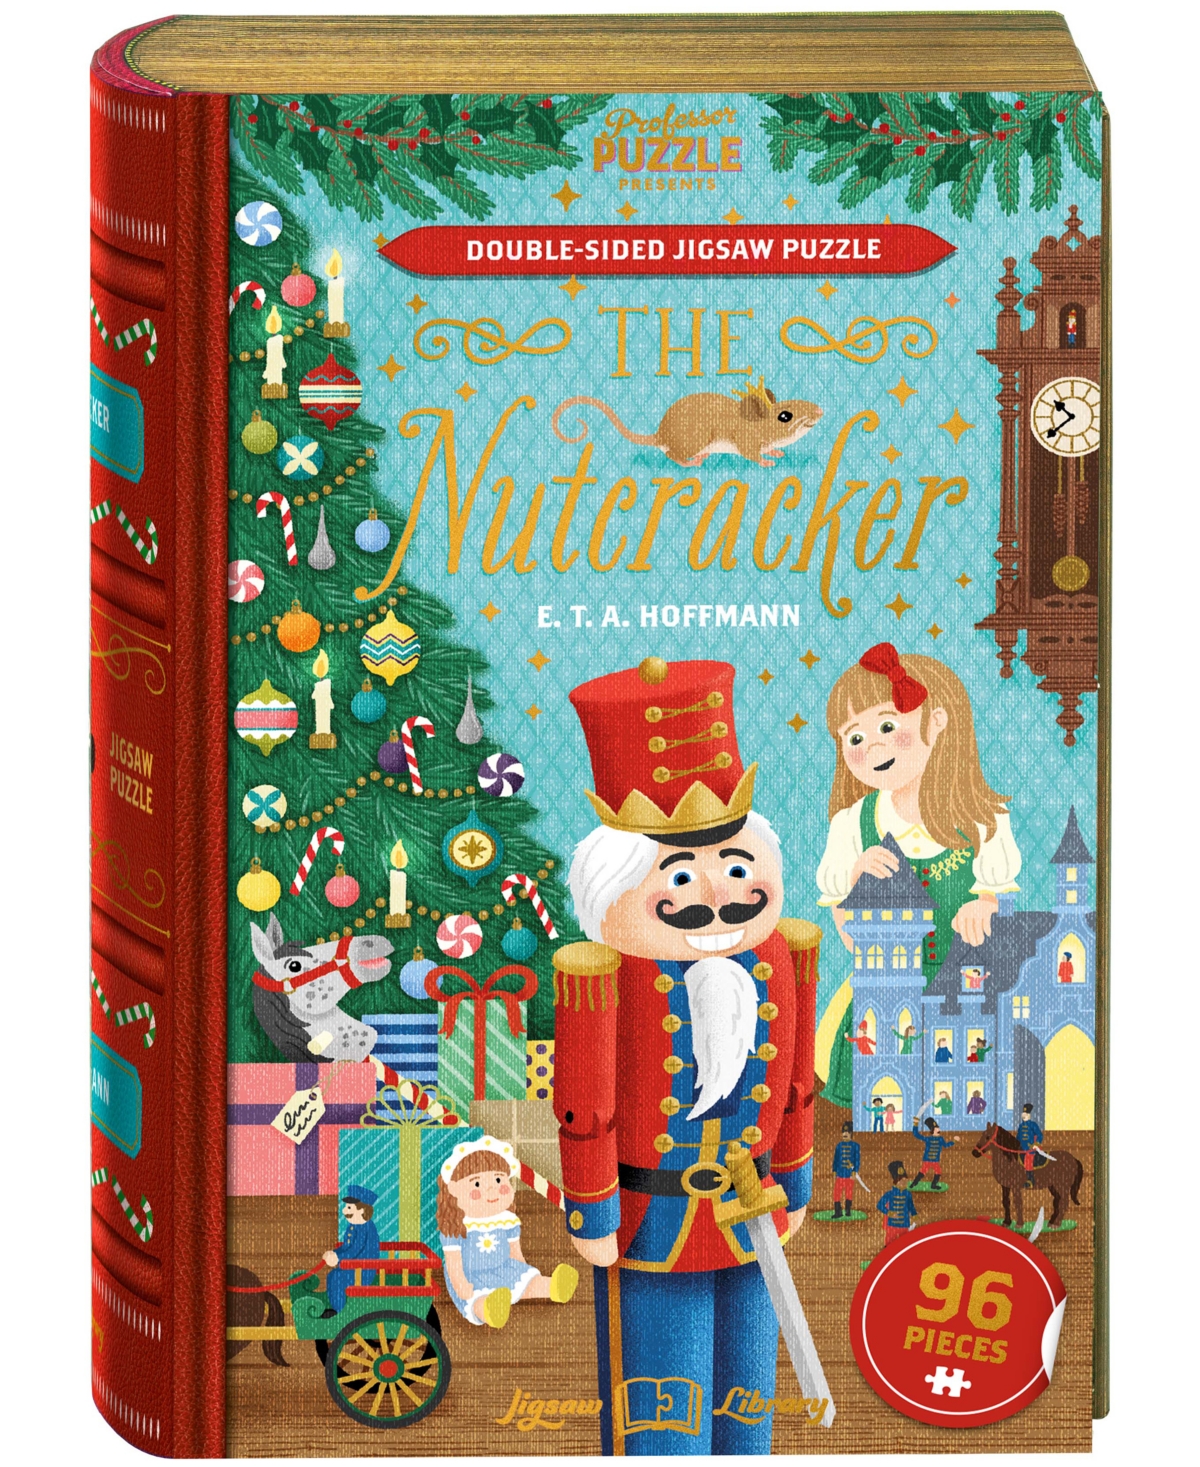 University Games Kids' Professor Puzzle E.t.a. Hoffman's The Nutcracker Double-sided Jigsaw Puzzle, 96 Pieces In No Color